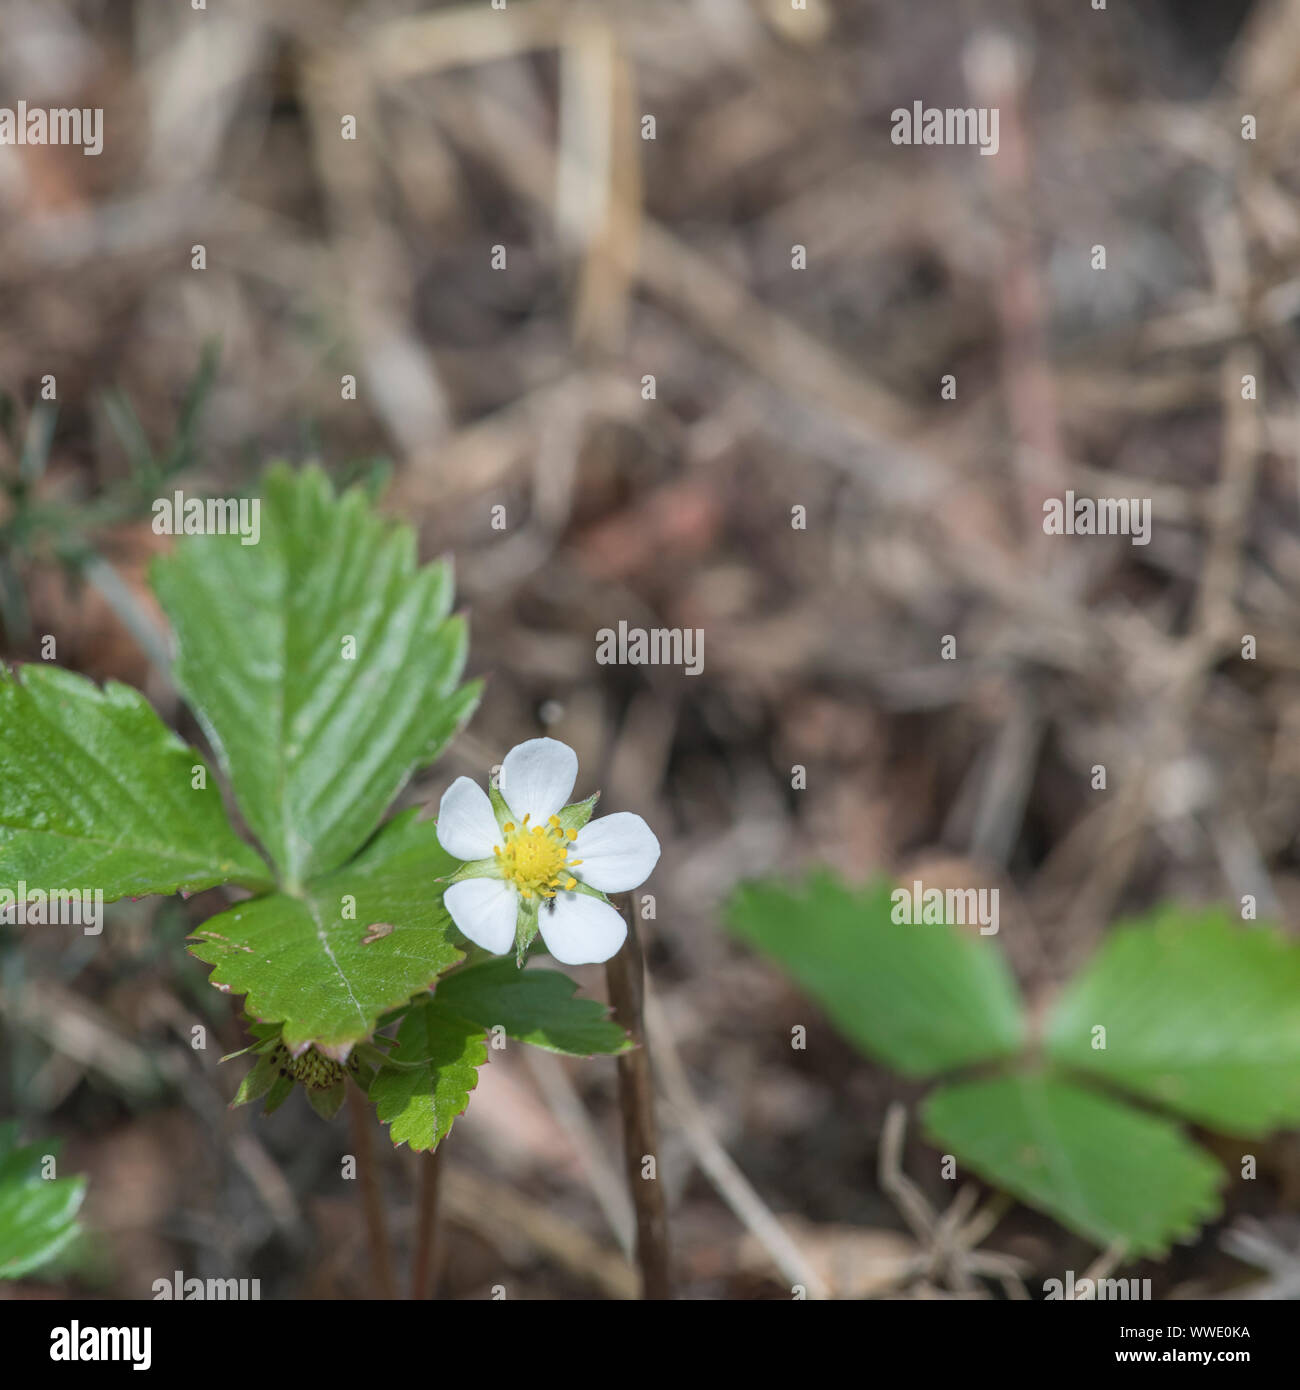 Macro close-up of Wild Strawberry / Fragaria vesca flower - small fruit is a real hedgerow / countryside treat for wild food foragers. Stock Photo